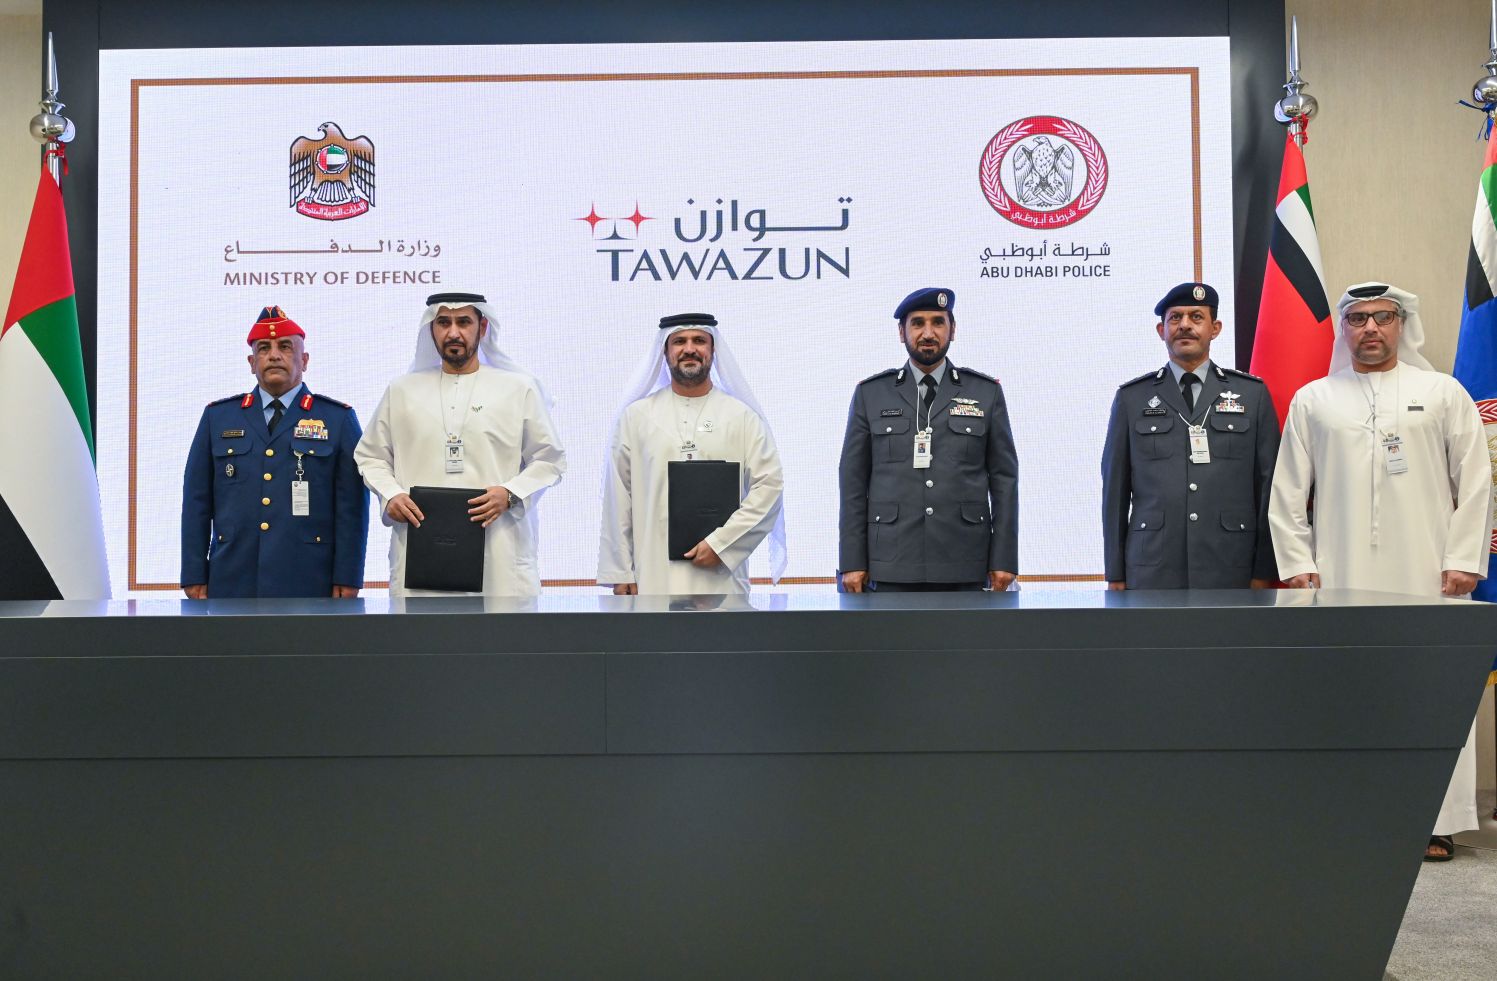 Tawazun has been placed in charge of the UAE’s military procurement processes. (Tawazun)